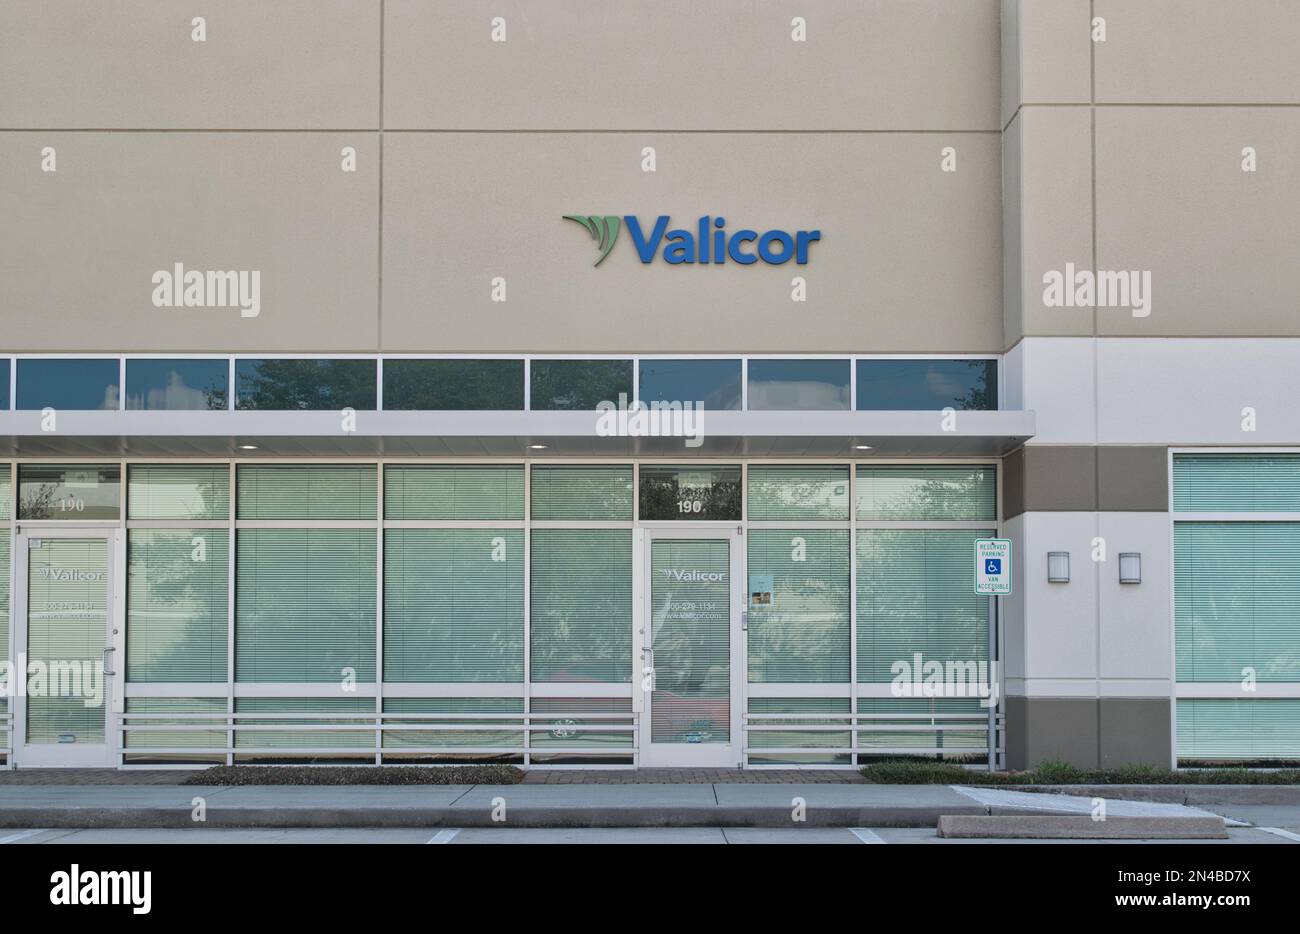 Houston, Texas USA 02-05-2023: Valicor office building exterior in Houston, TX. Sustainable waste management solutions business. Stock Photo